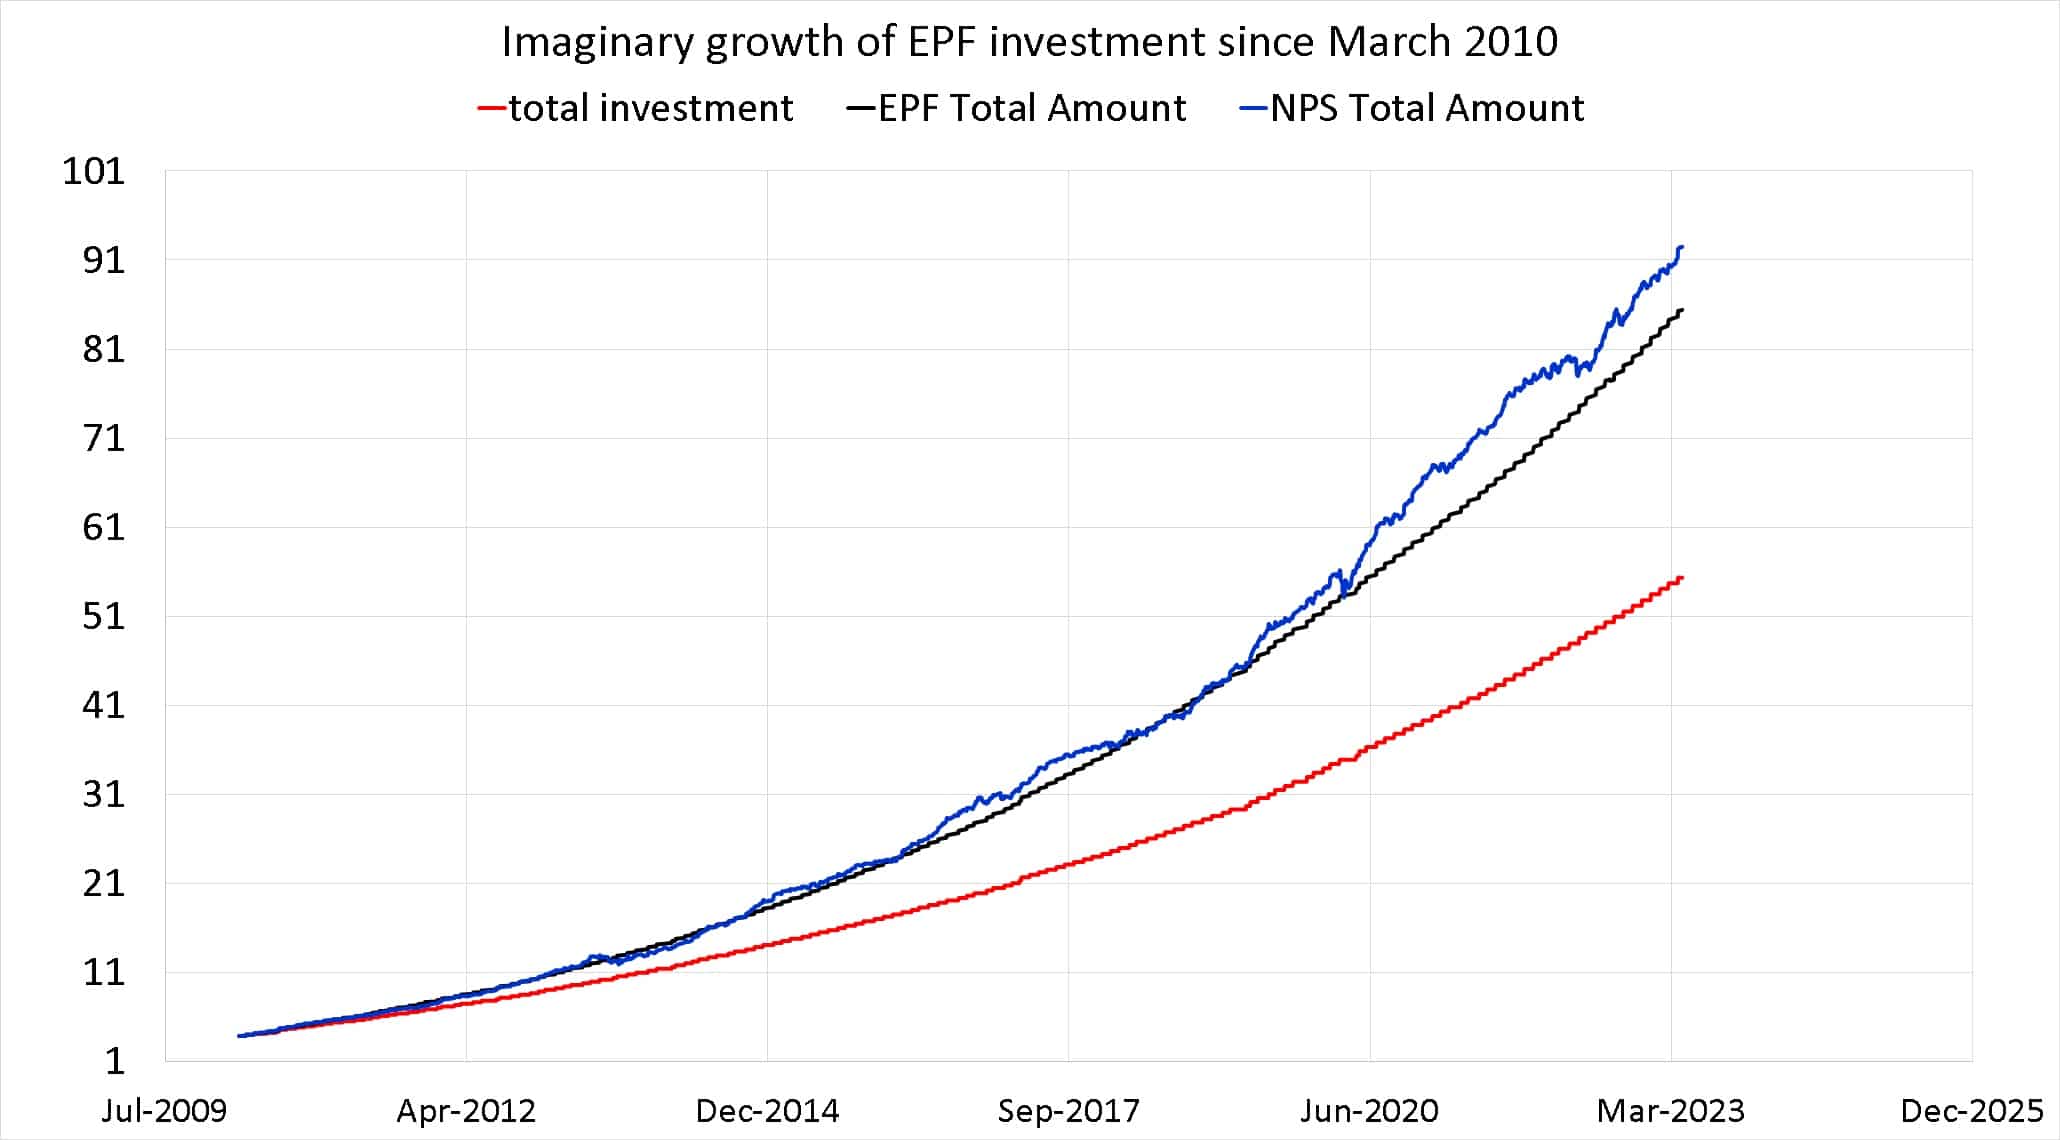 Imaginary growth of EPF investment from March 2010 to April 2023